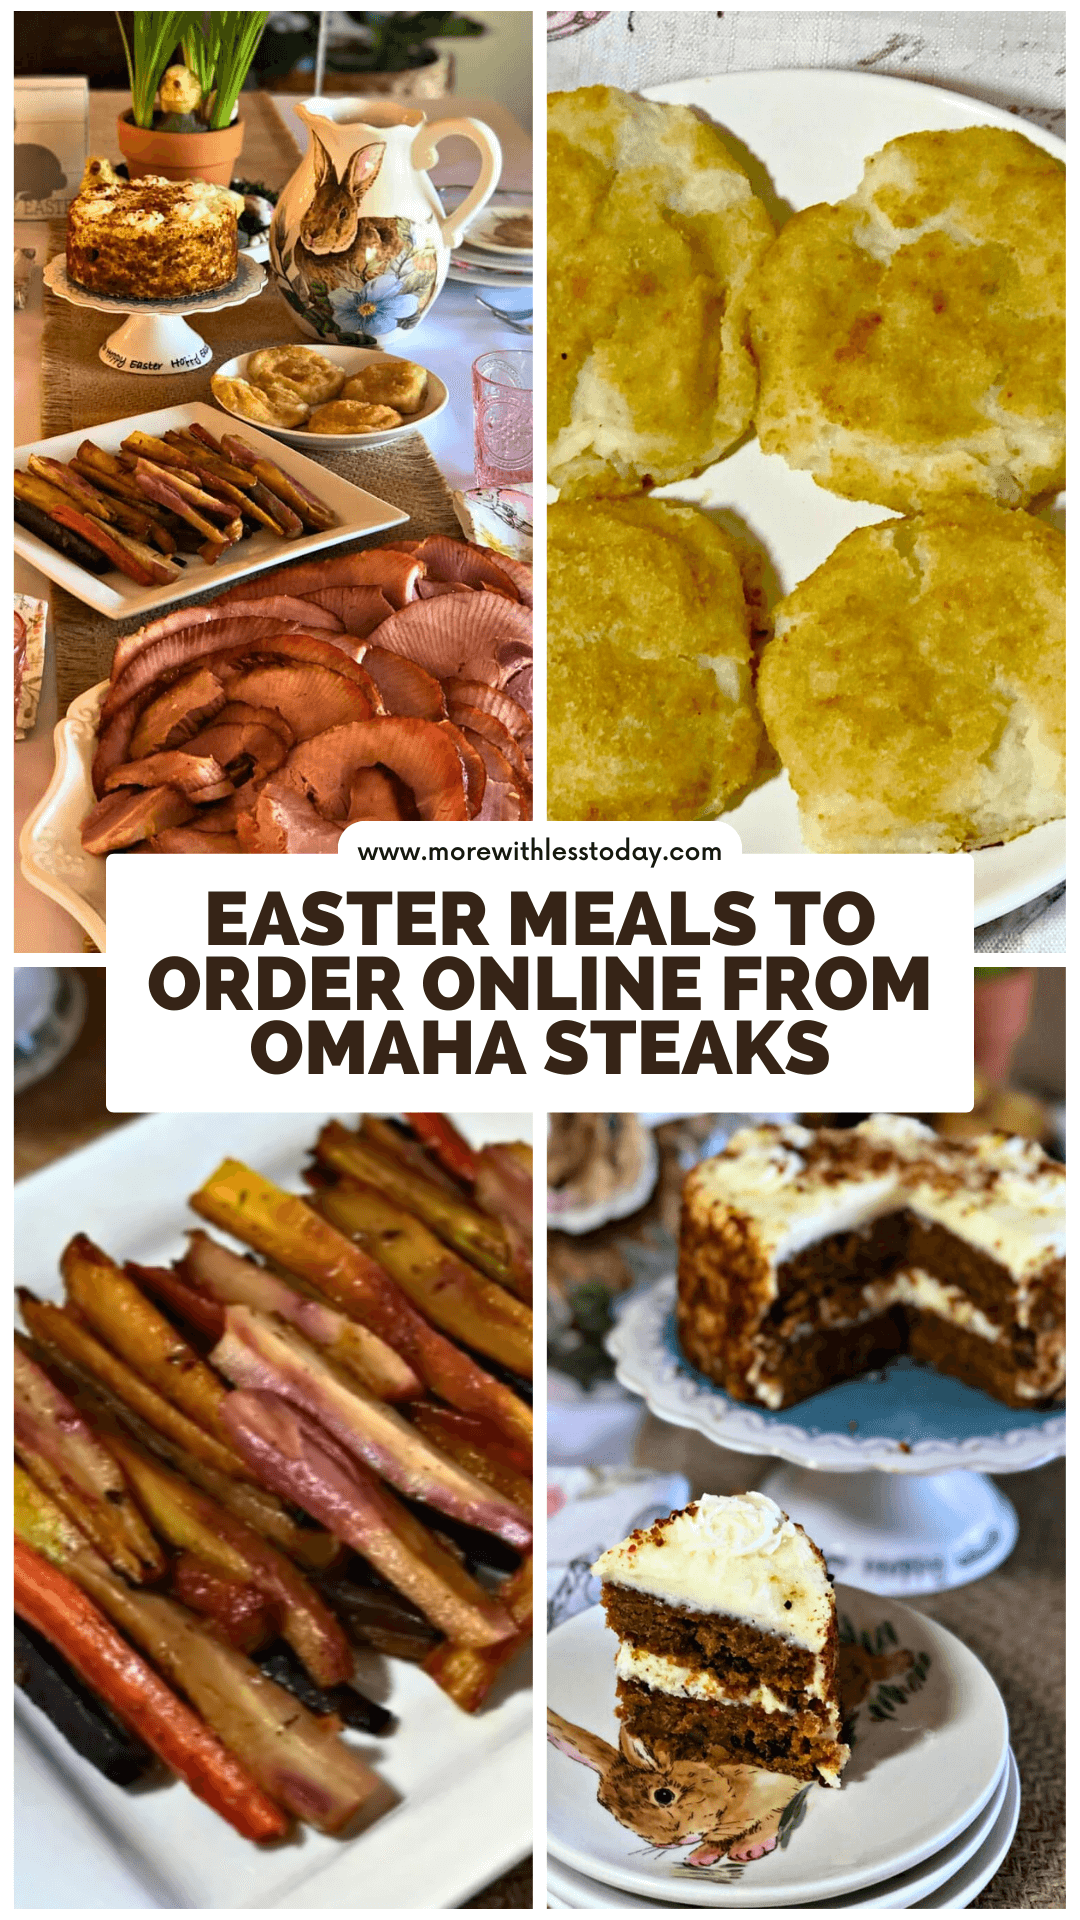 Easter Meals to Order Online from Omaha Steaks - PIN